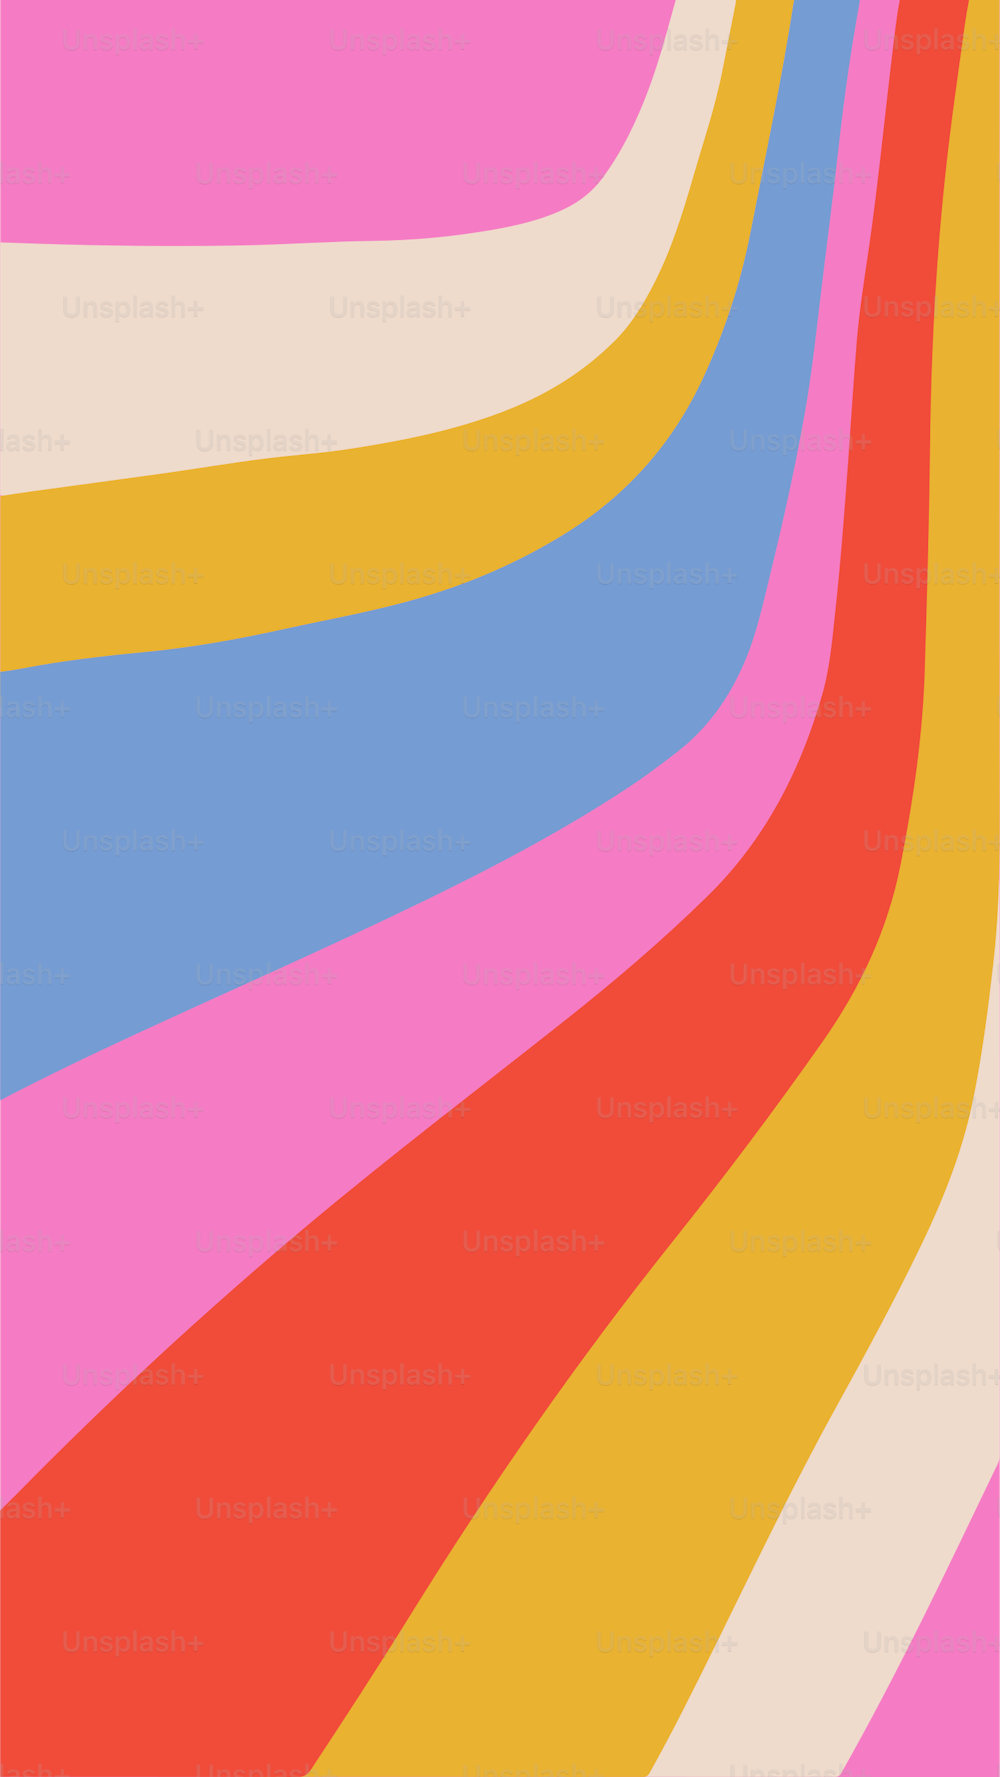 Groovy Retro Style Rainbow Wave Stripes Background. Vector simple vertical illustration for social media in size of phone screen.